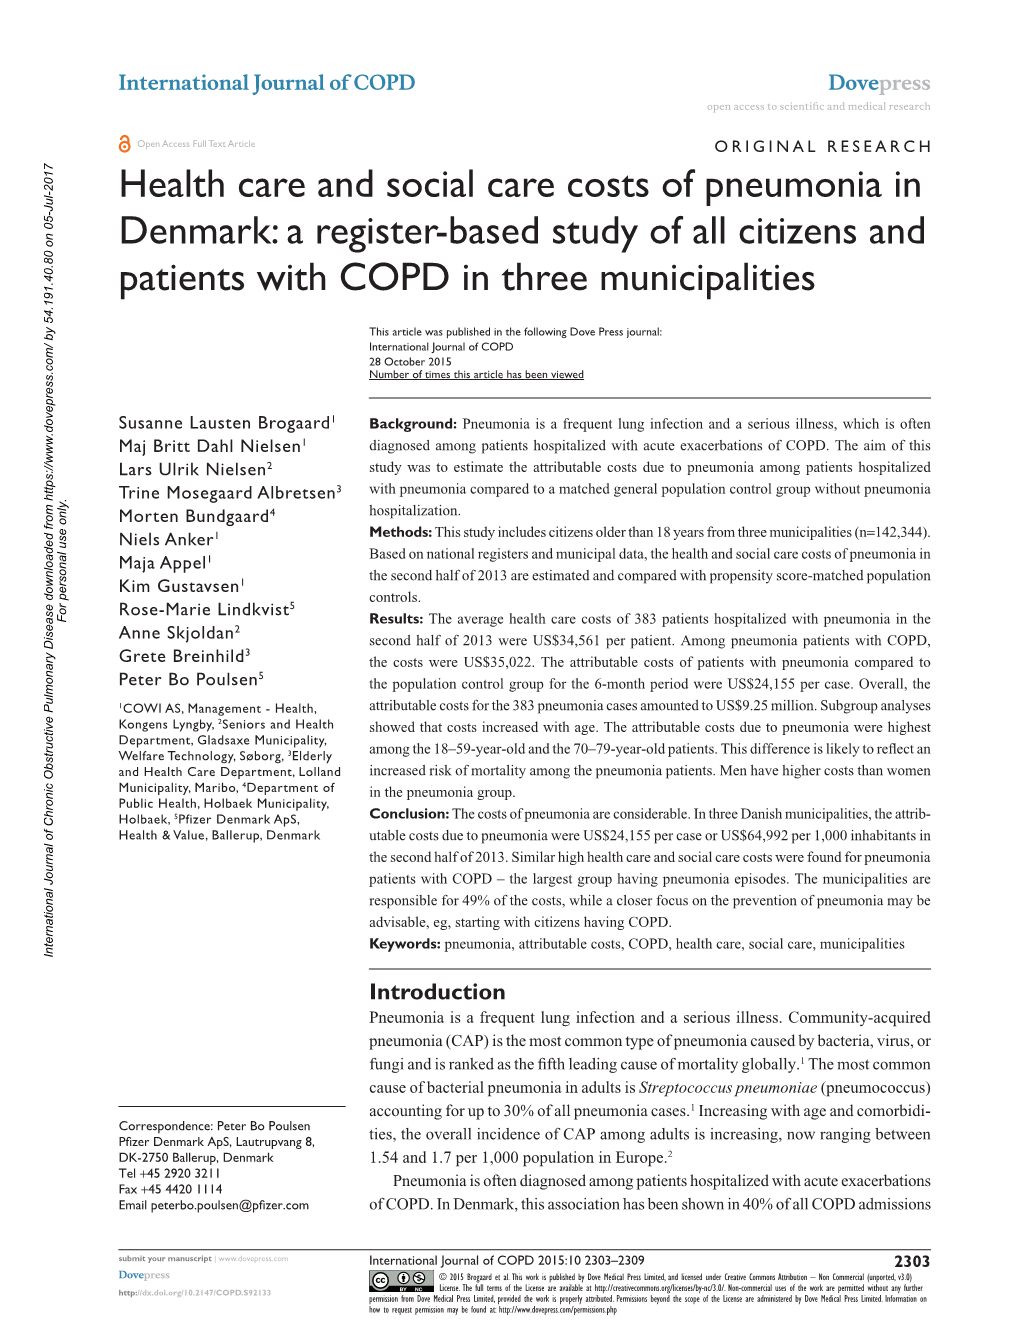 Health Care and Social Care Costs of Pneumonia in Denmark: a Register-Based Study of All Citizens and Patients with COPD in Three Municipalities